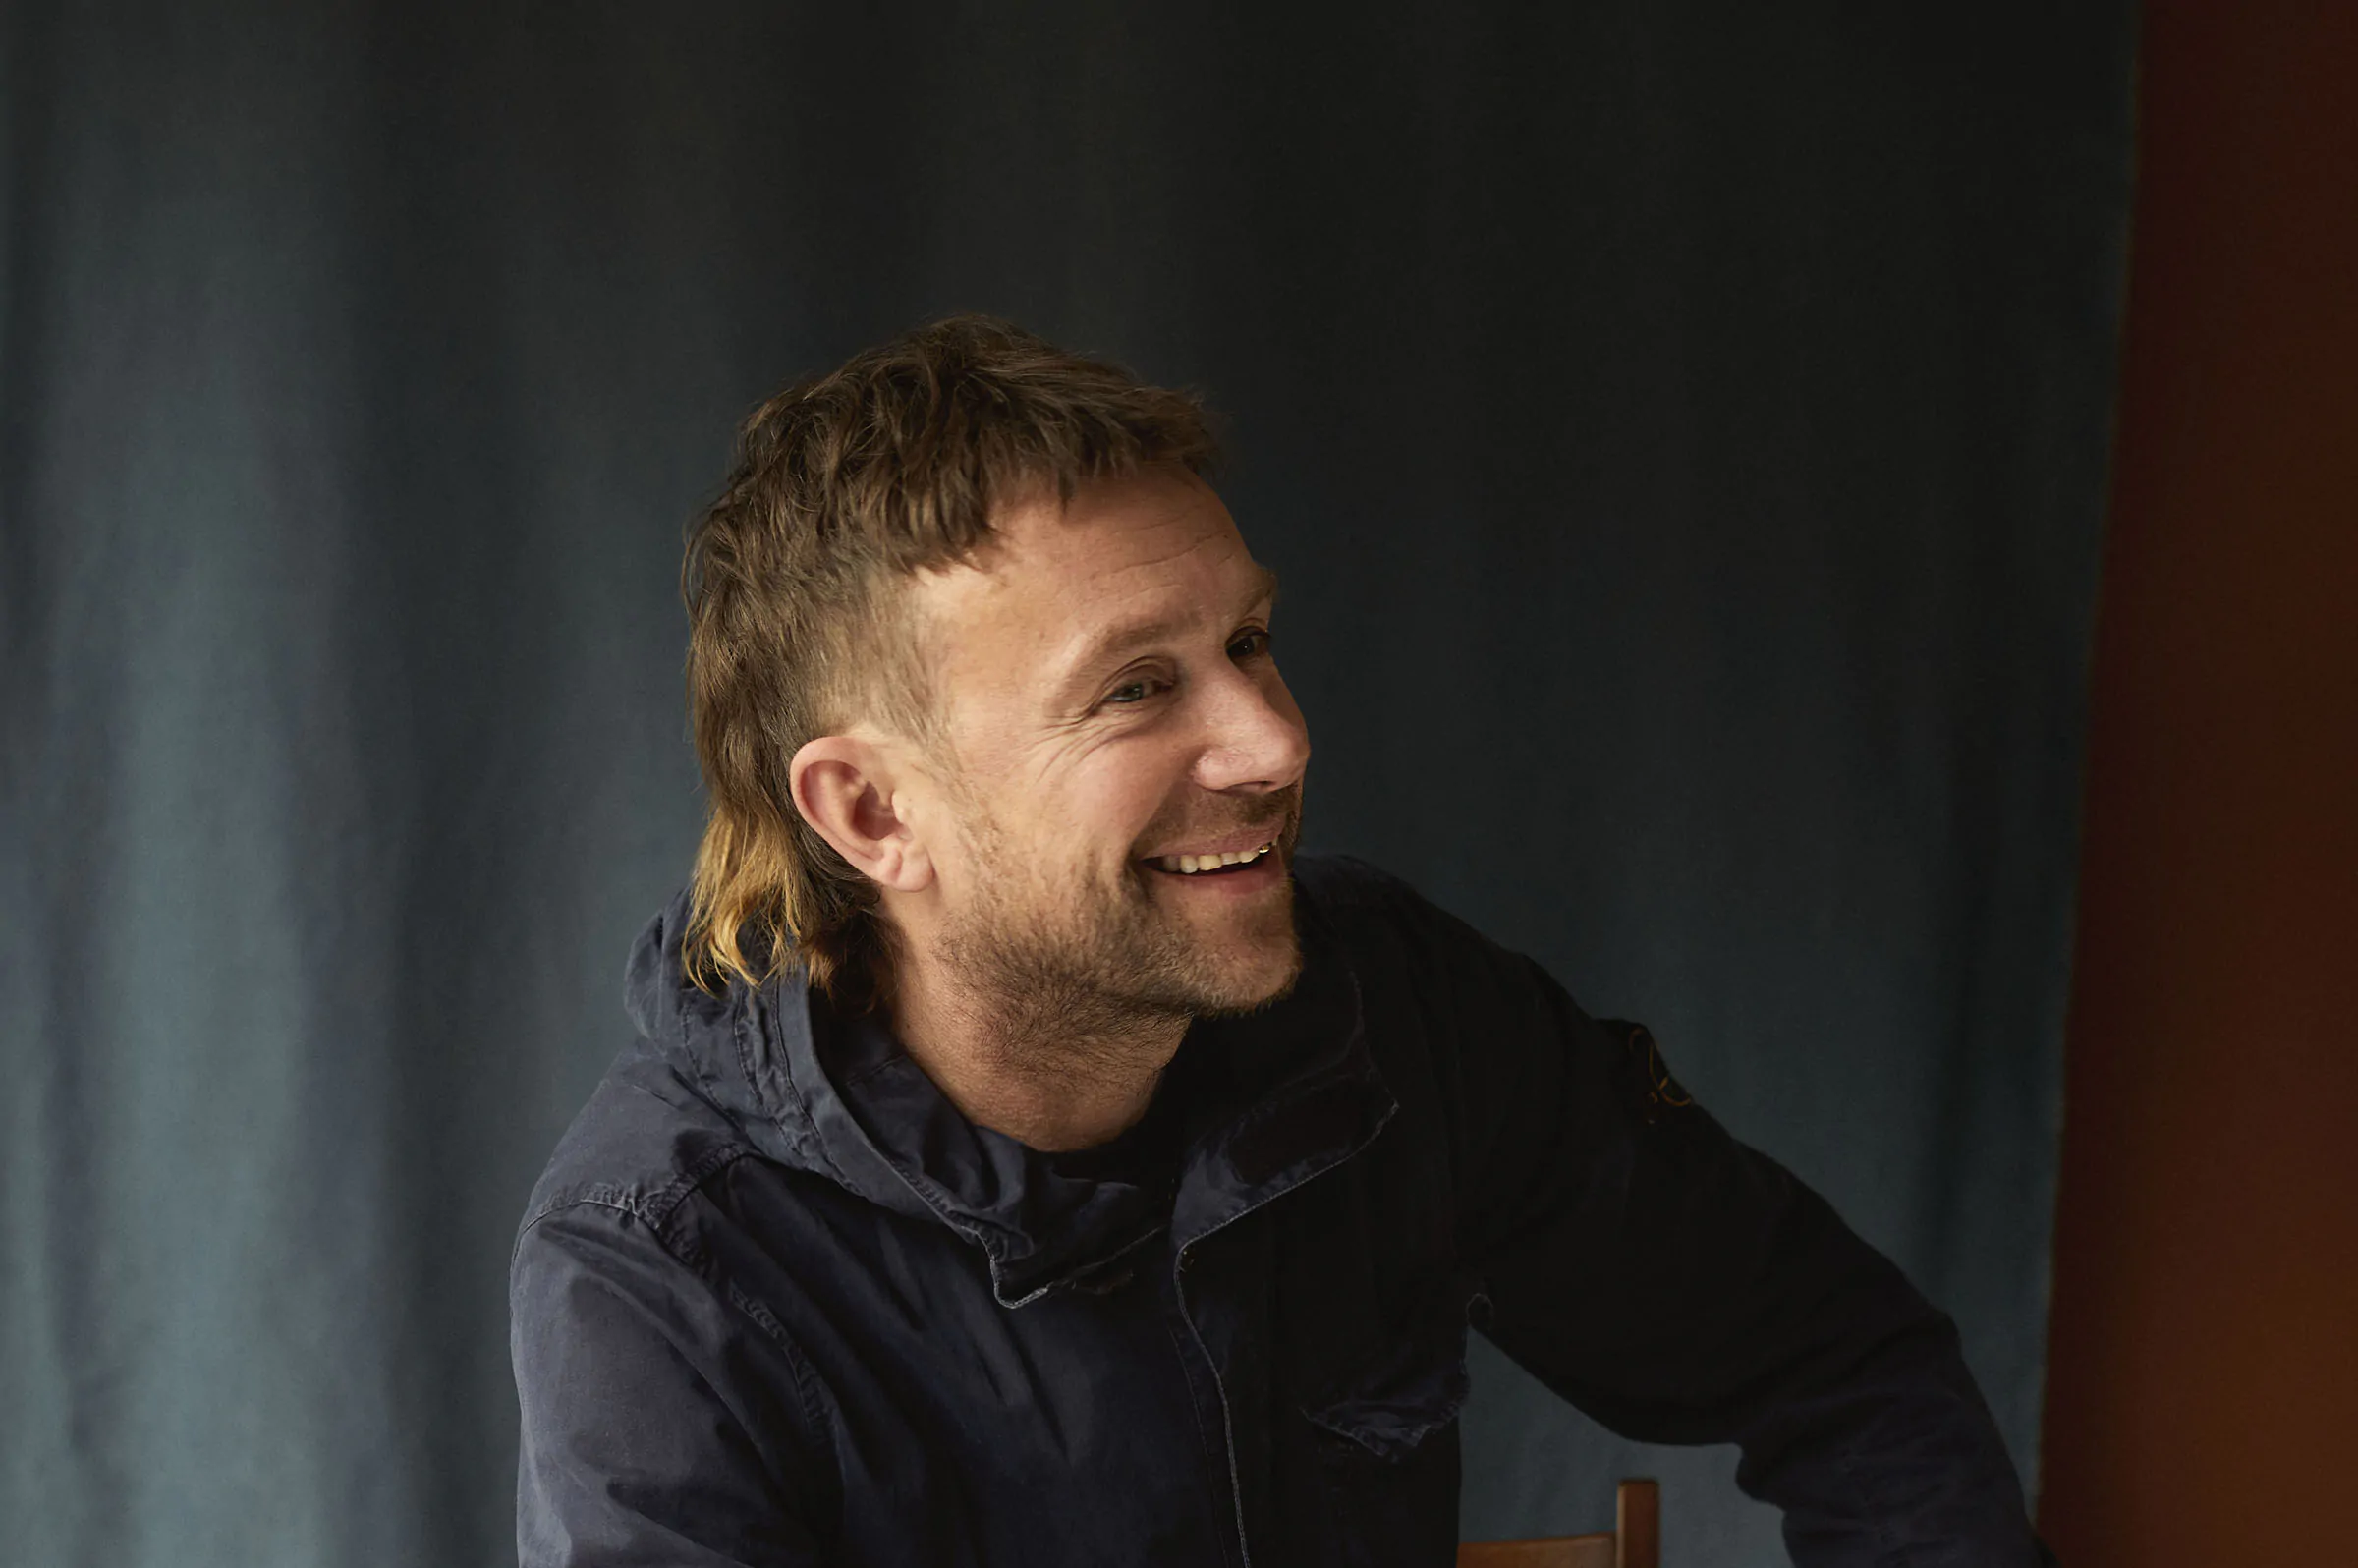 DAMON ALBARN shares new track ‘Polaris’ from forthcoming album ‘The Nearer The Fountain, More Pure The Stream Flows’